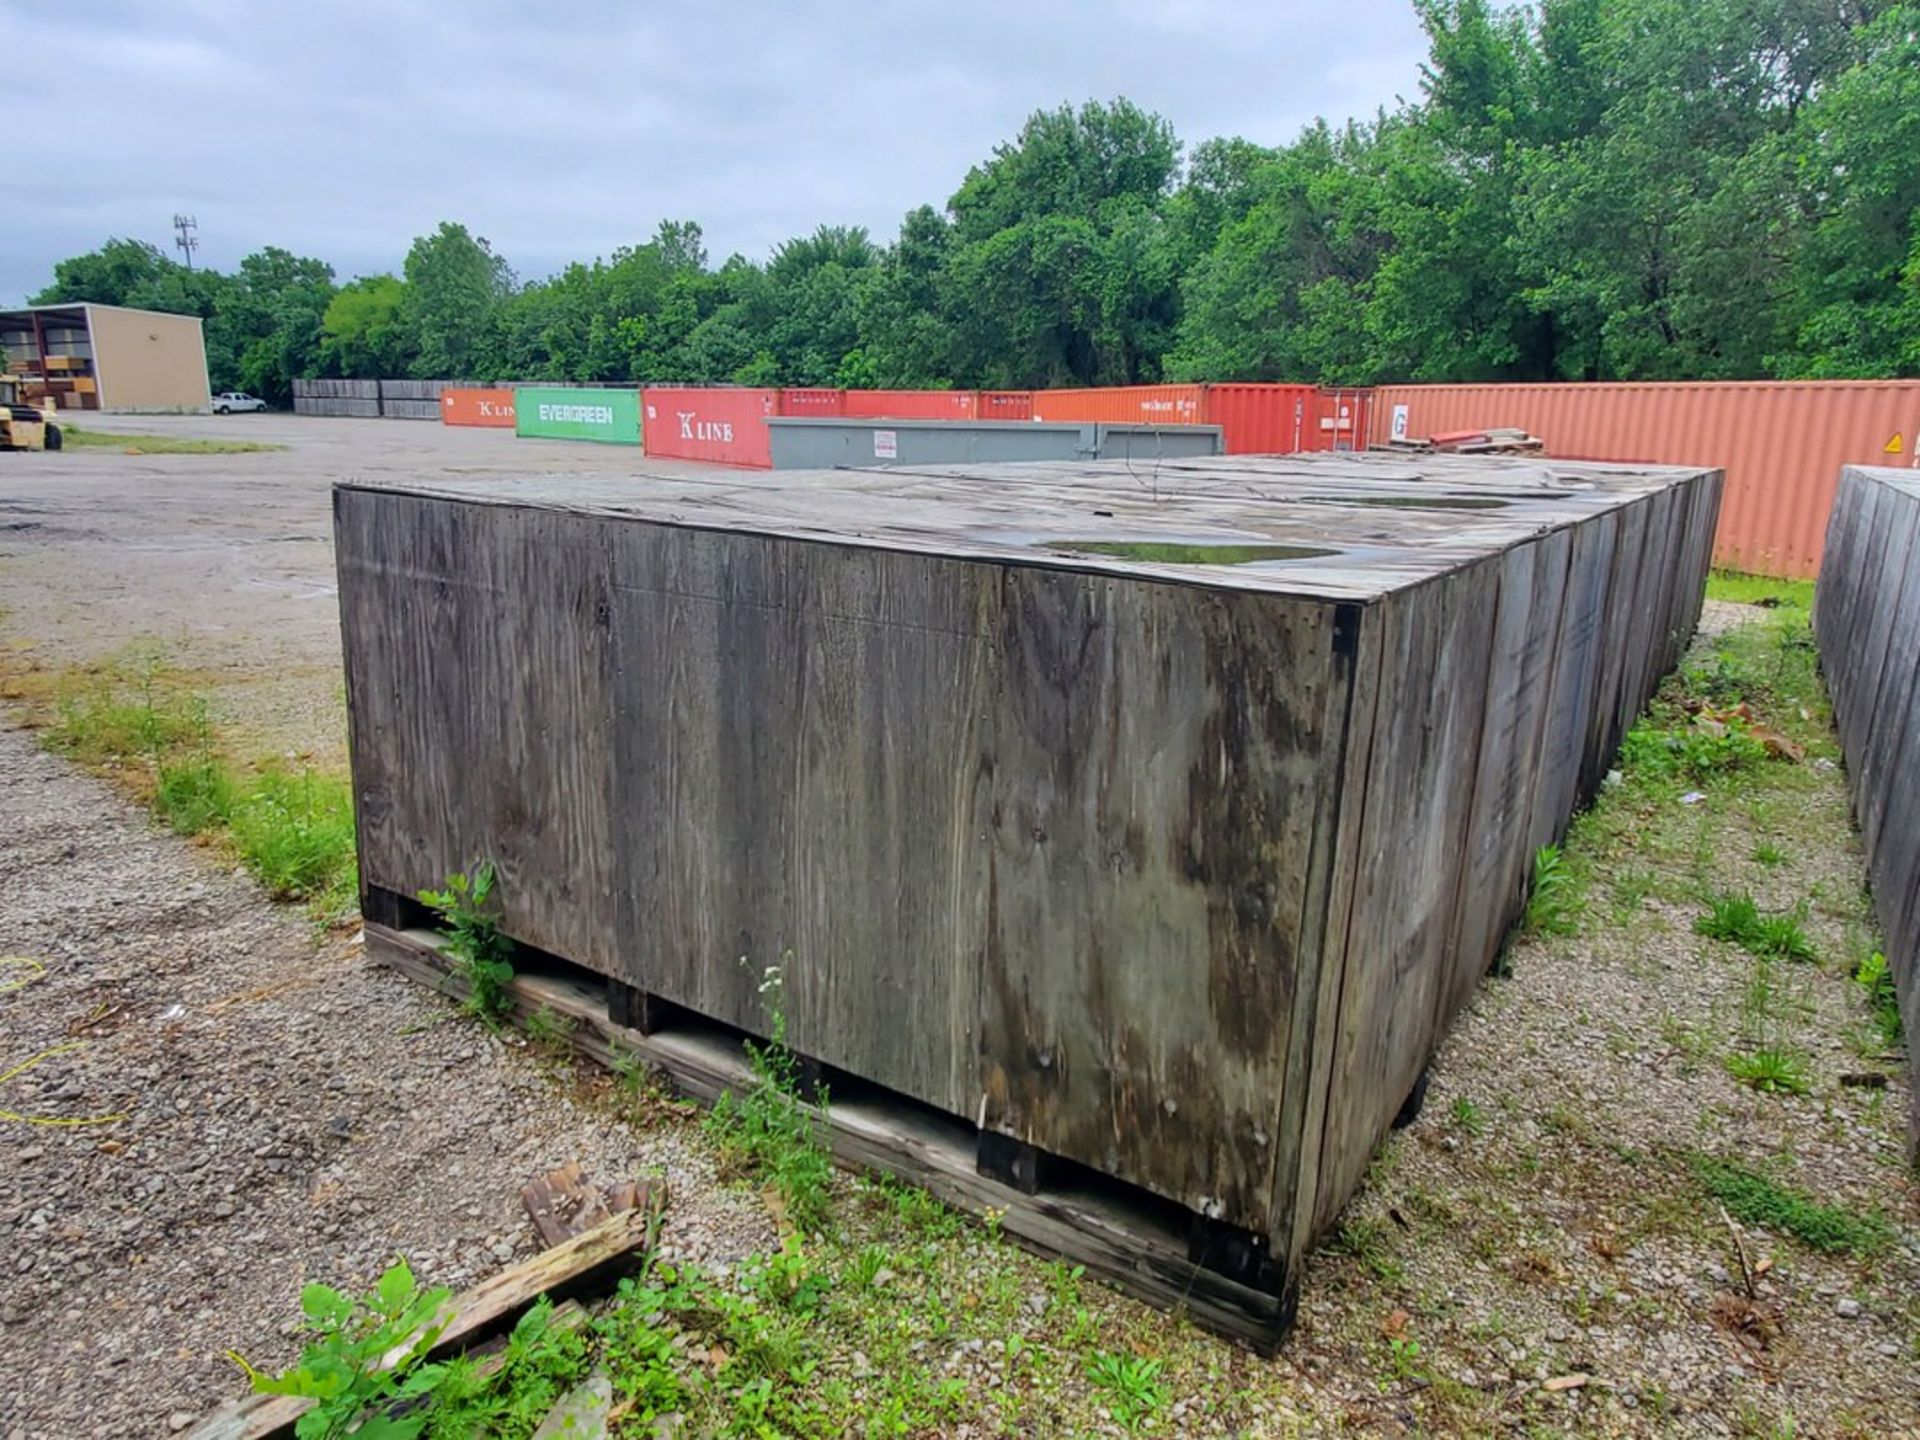 Recirculation Duct Crate Dims:464" x 126" x 64"H; Gross Weight: 10,500lbs (Location:Tulsa, OK) - Image 6 of 8